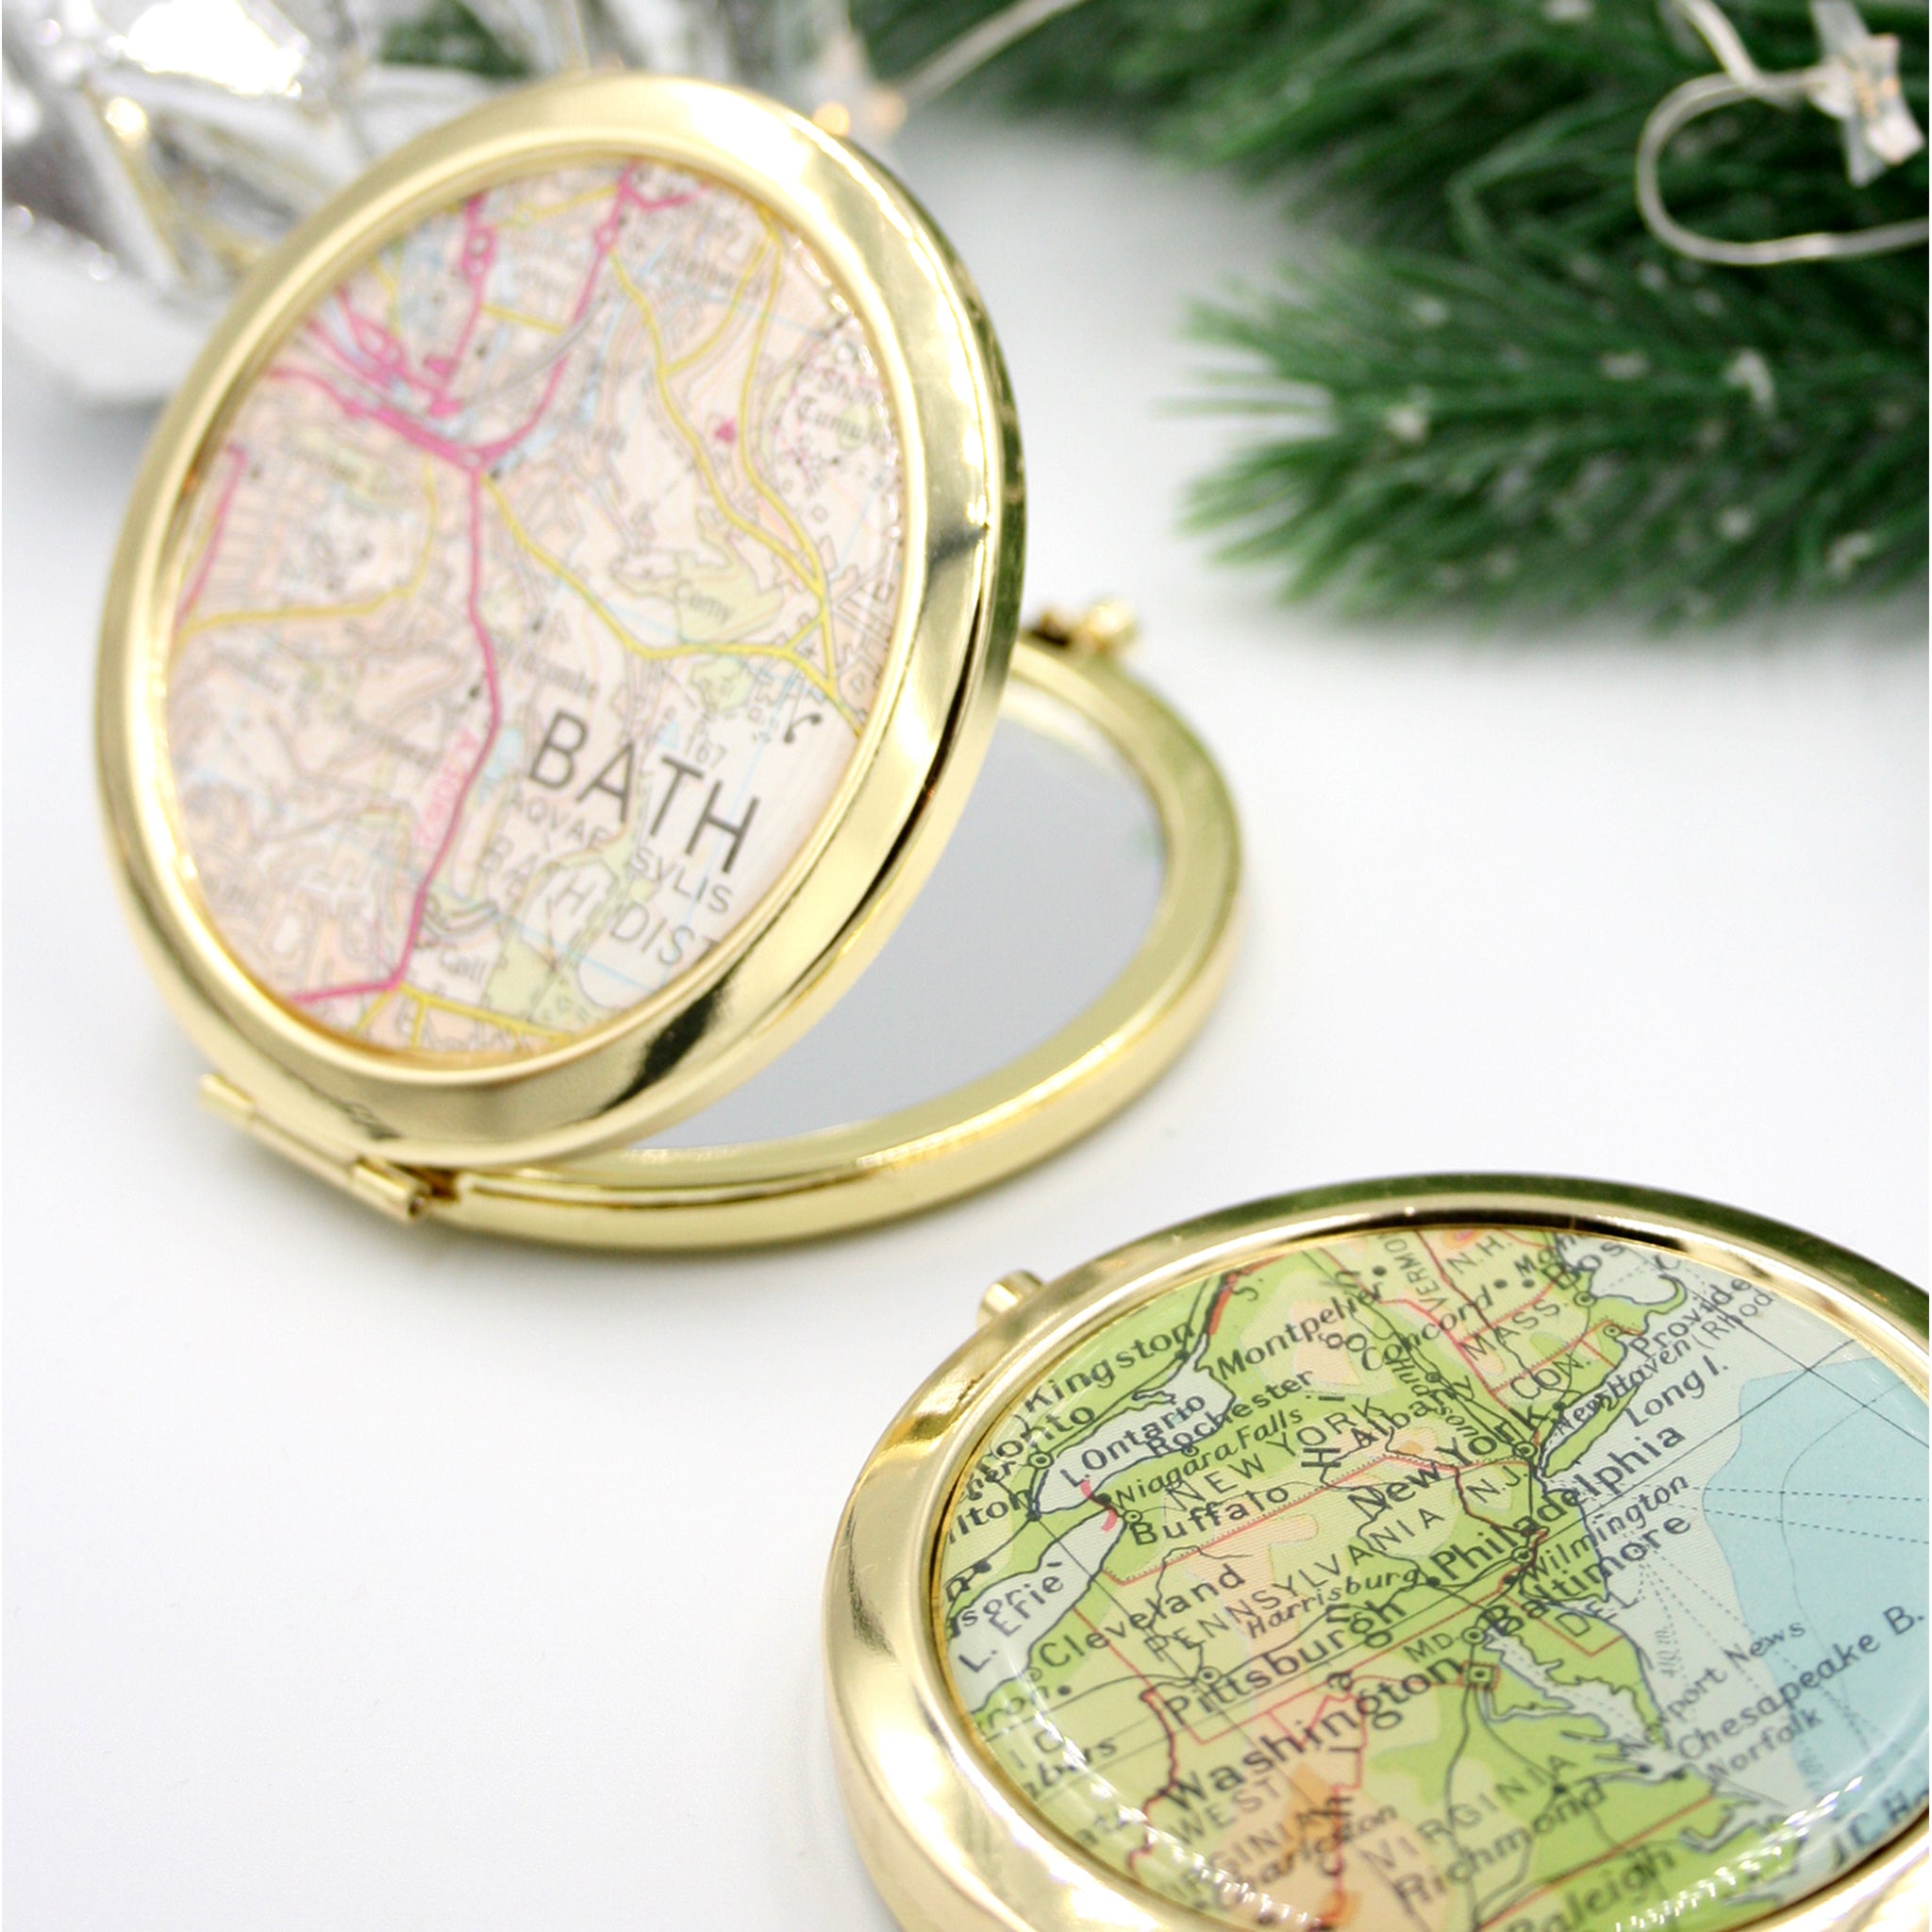 Personalised Compact Mirror in gold color featuring map of Bristol and New York